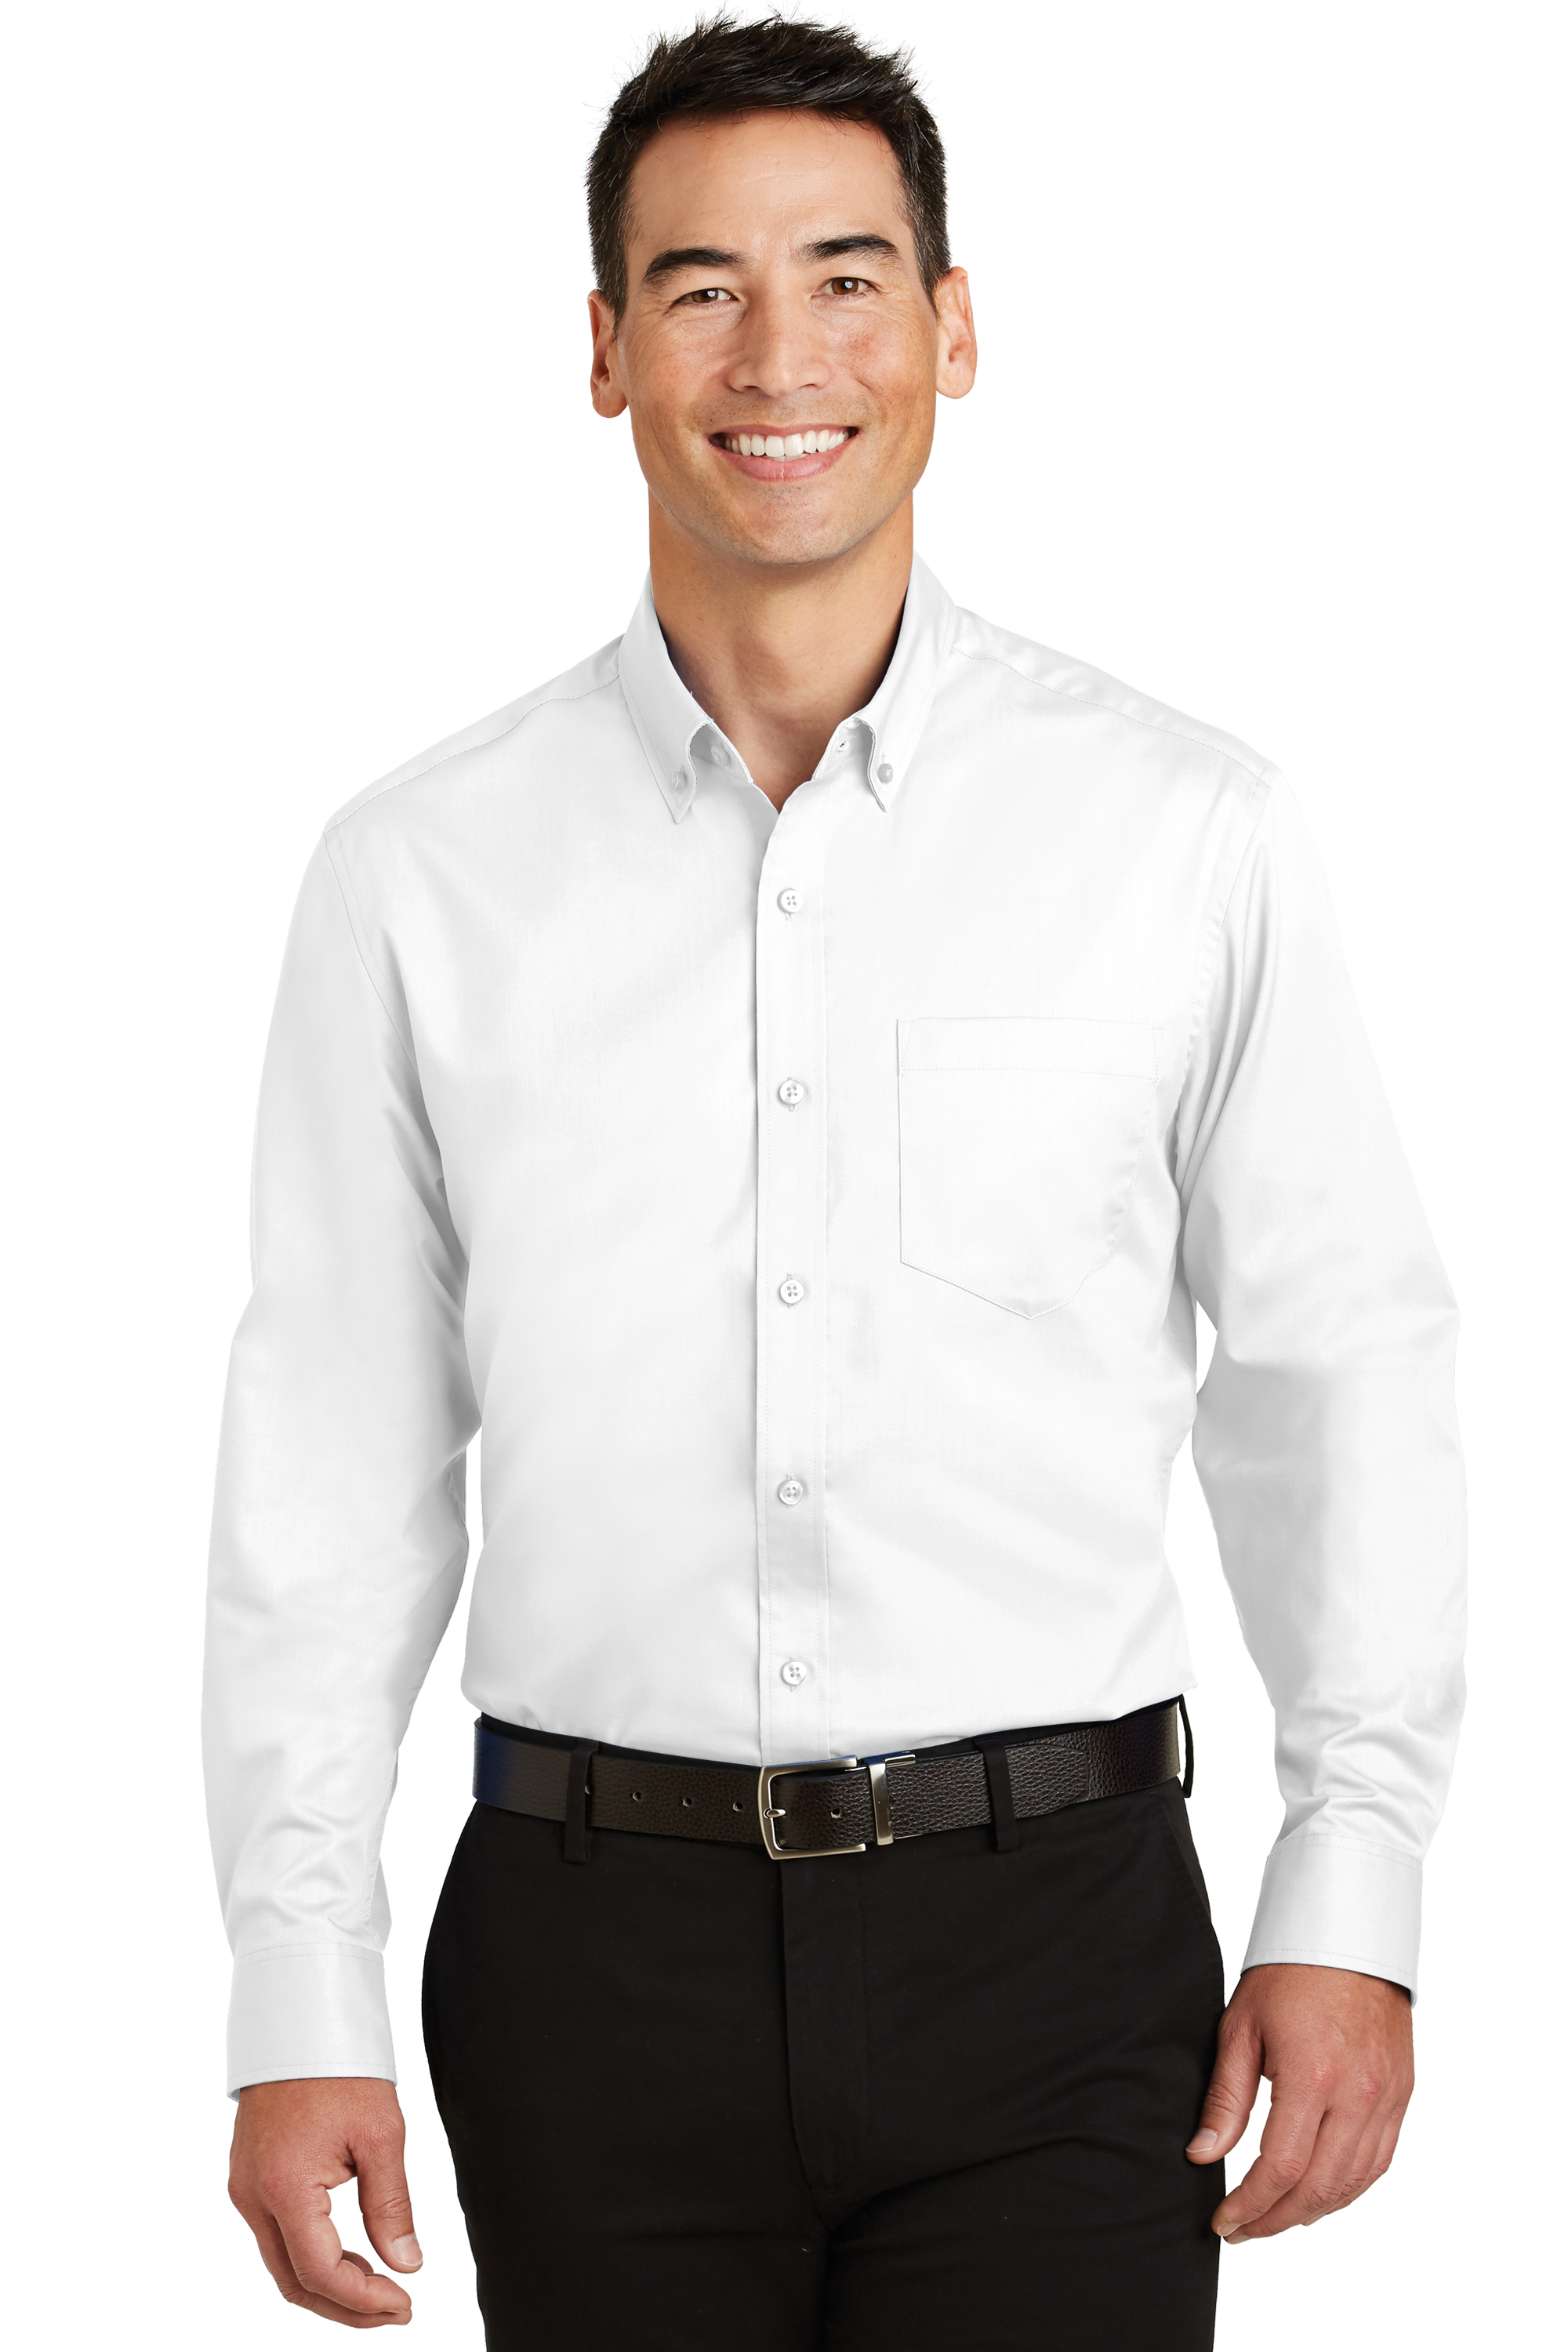 Port Authority S663 Embroidered SuperPro Twill Shirt